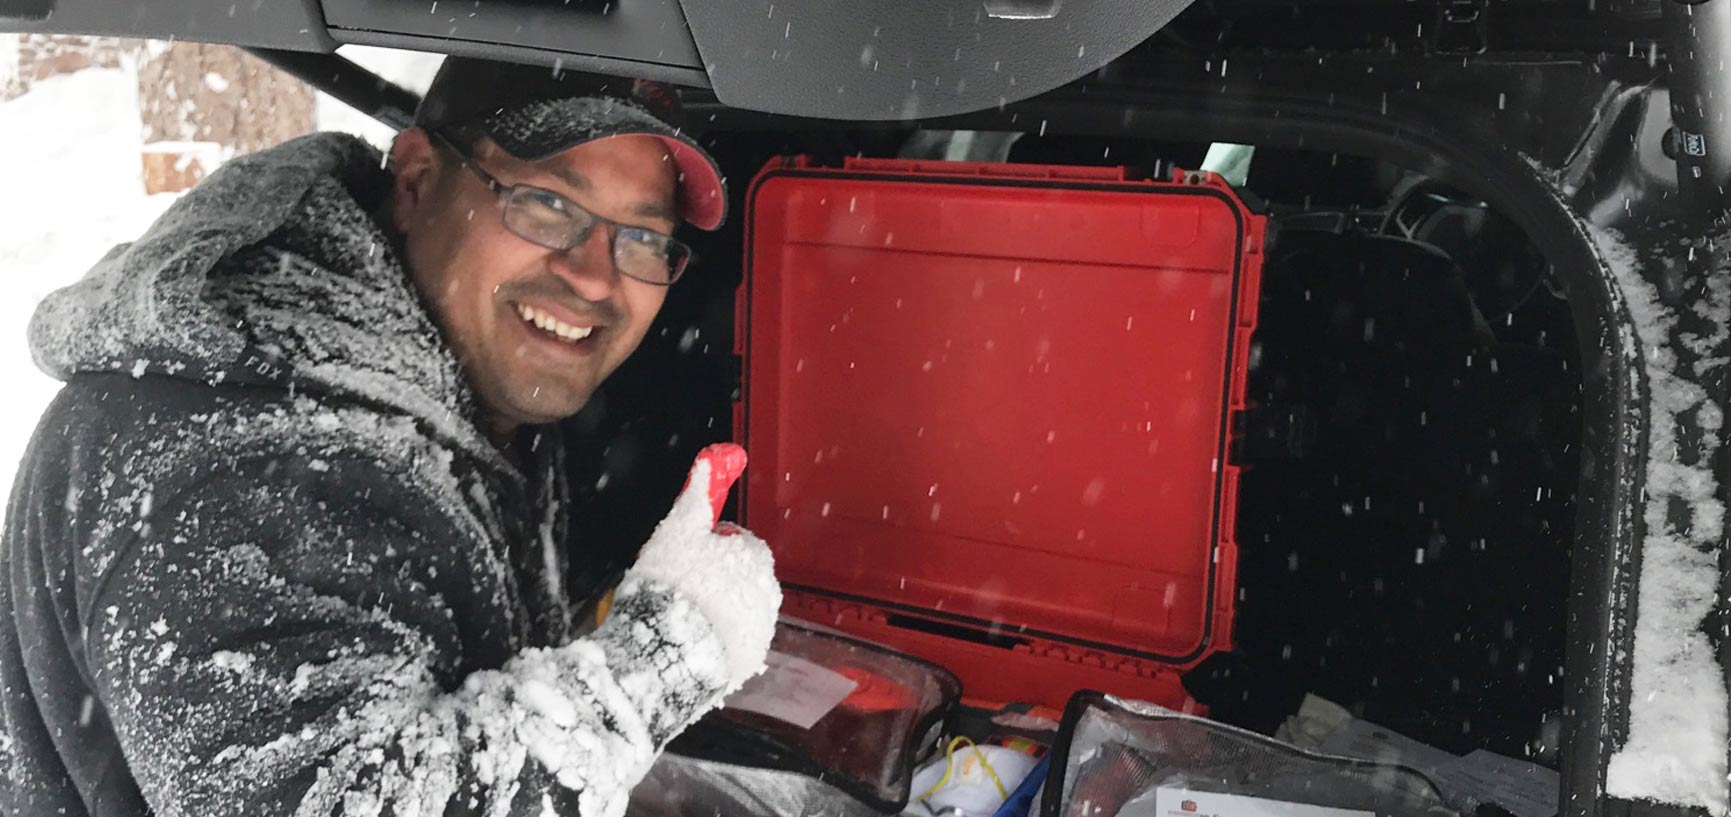 Team Emergency Case went out to Big Bear, CA to test out some gear in the snow. We got just that and more! Temperatures dropped to 14 degrees and our car got covered in snow, letting us test gear in more extreme conditions than planned. See how Emergency Case can better prepare you!